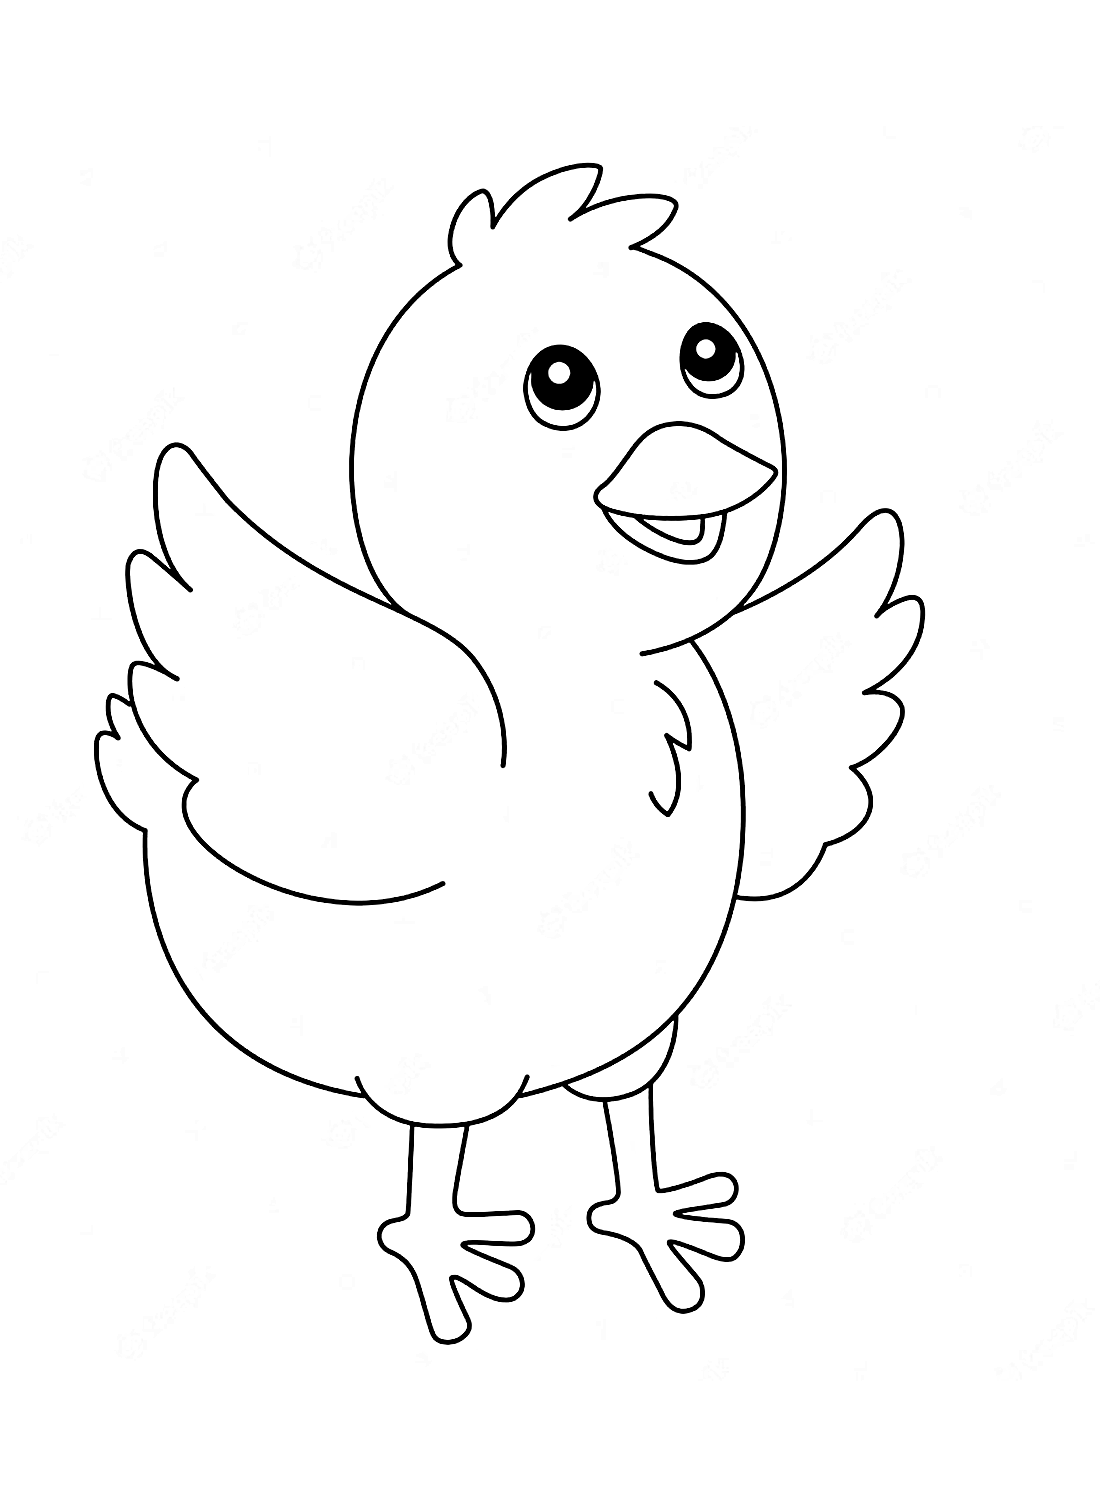 Printable chick from Chick